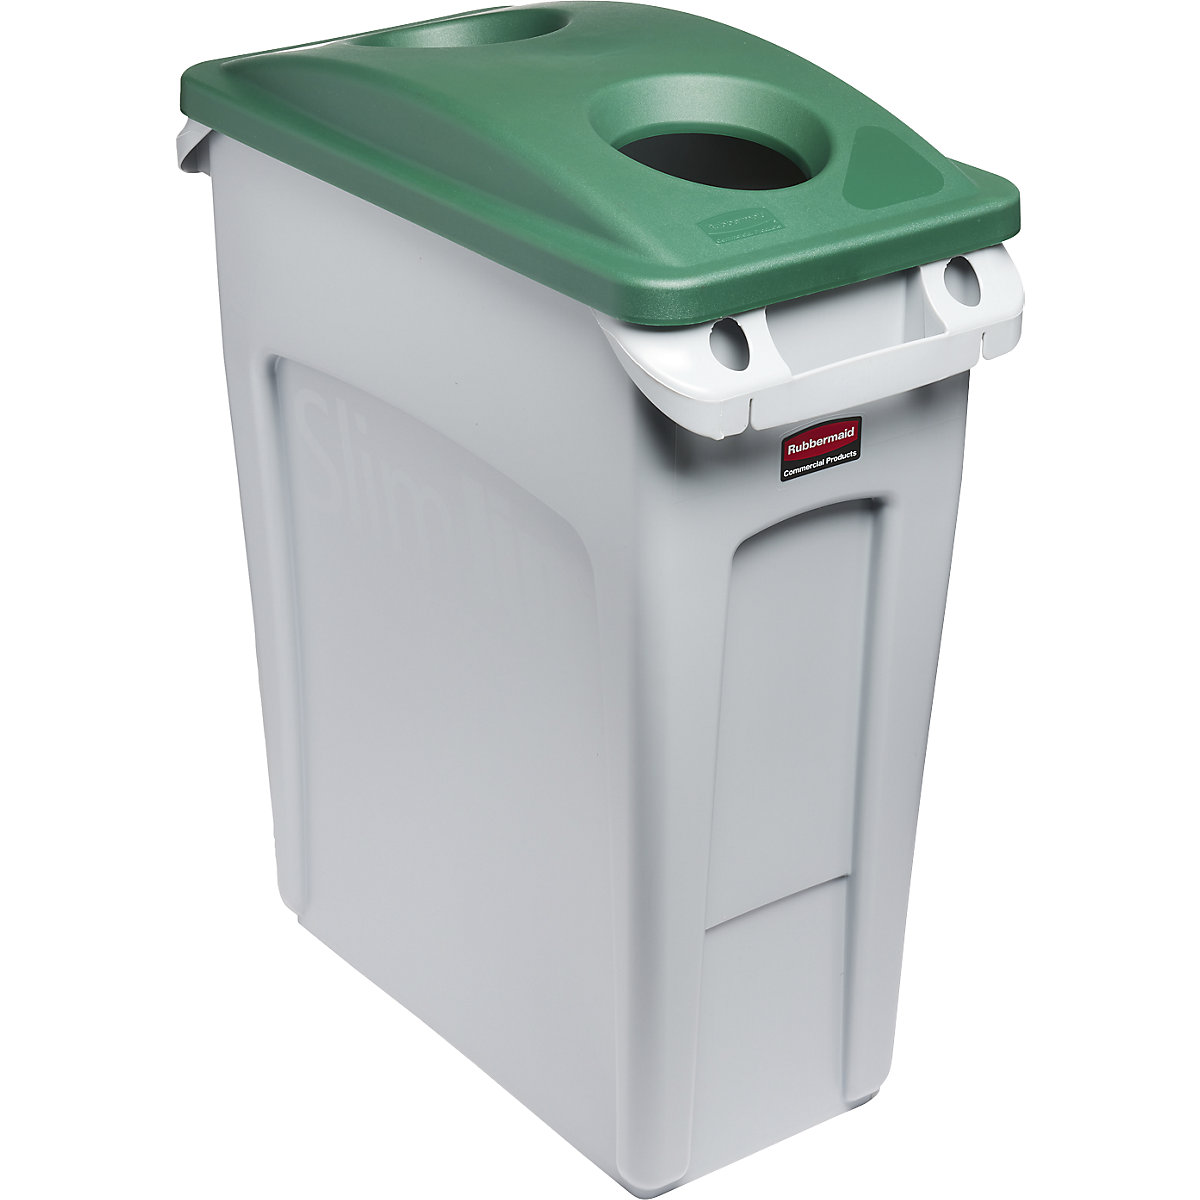 SLIM JIM® recyclable waste collector - Rubbermaid